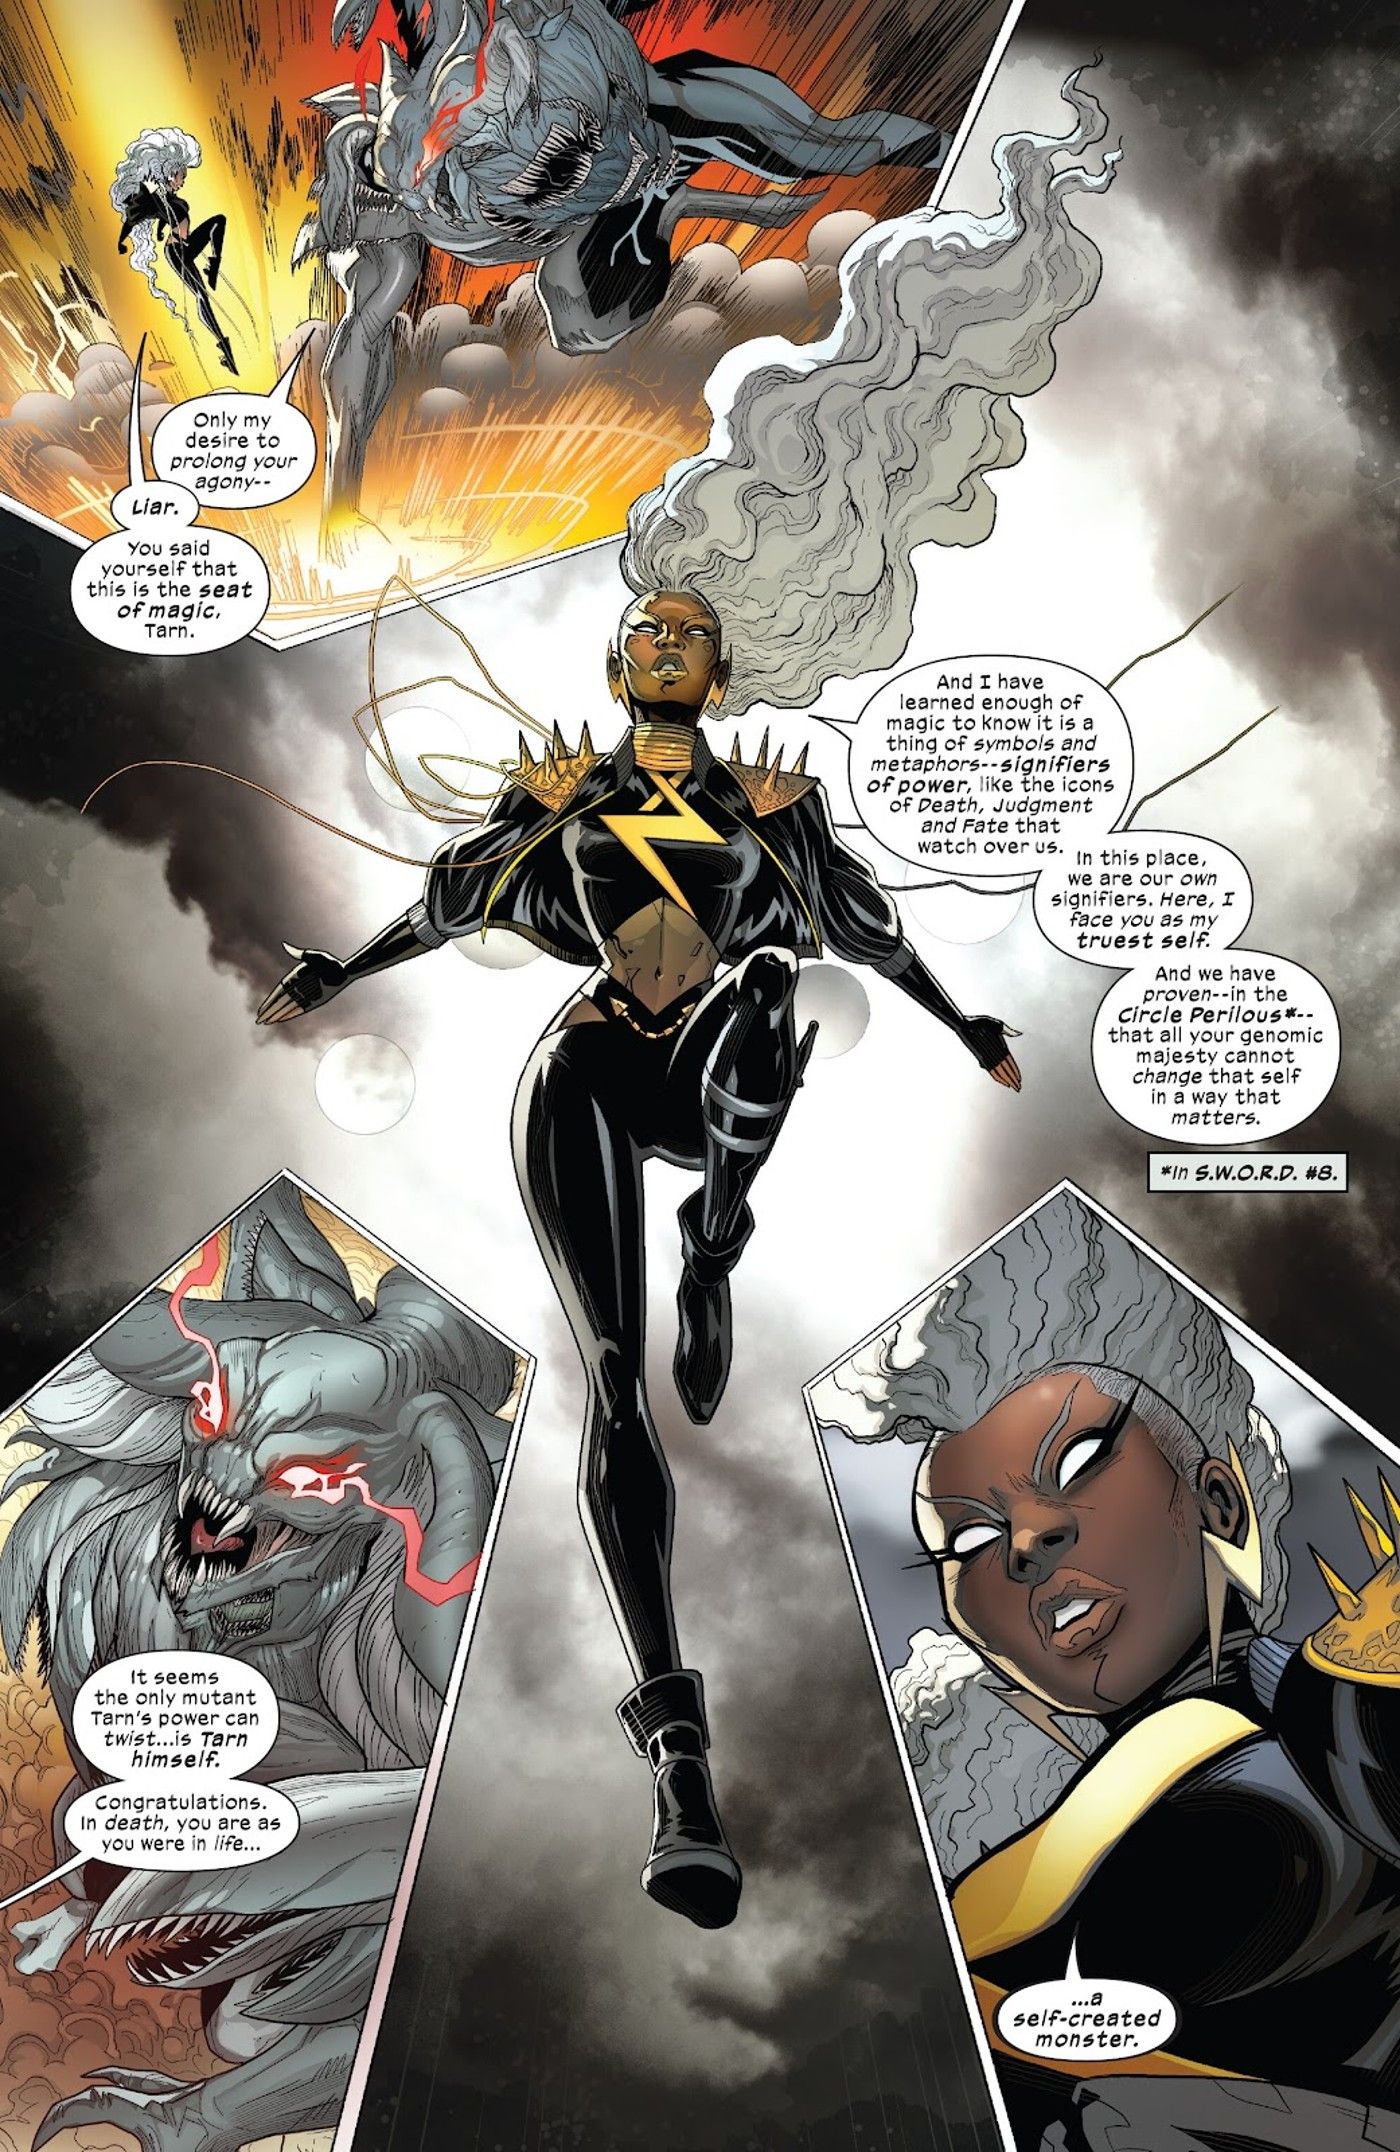 Four panels of Storm confronting Tarn in the afterlife.